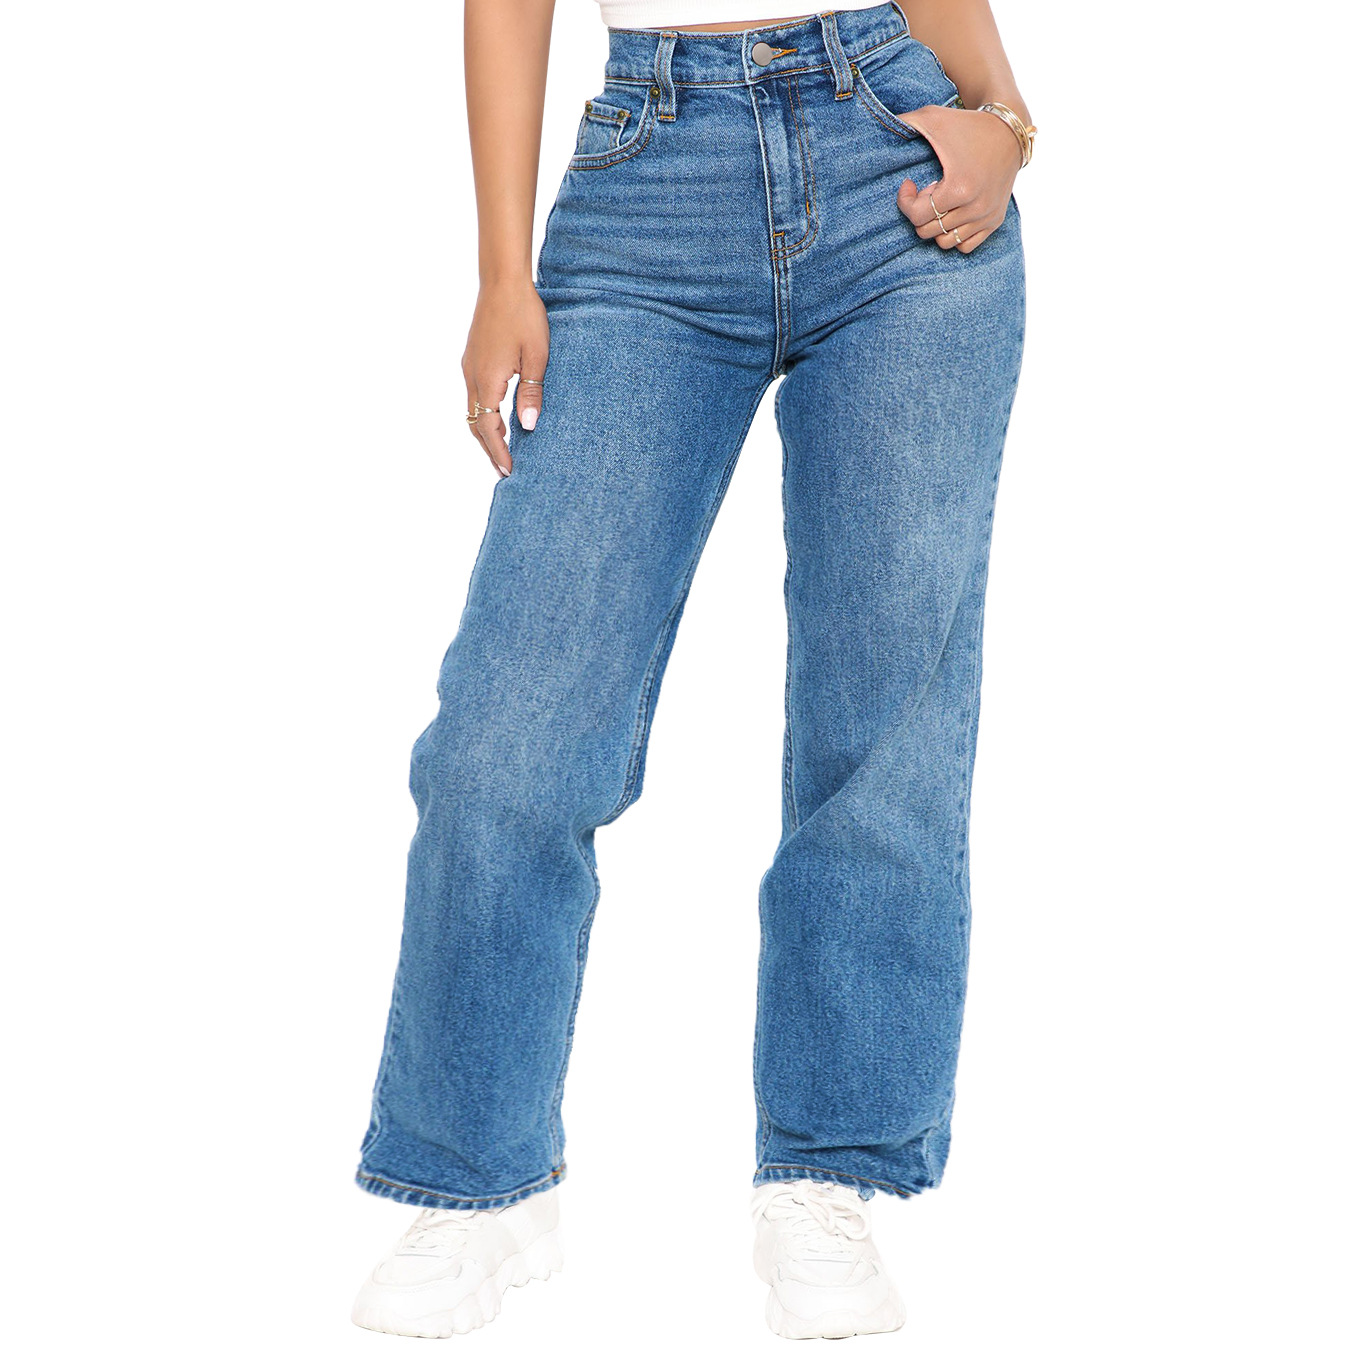   5686629# European and American Women's Clothing Cross-Border Amazon Wish New Products in Stock Fashion Is Casual Denim Straight-eg Pants